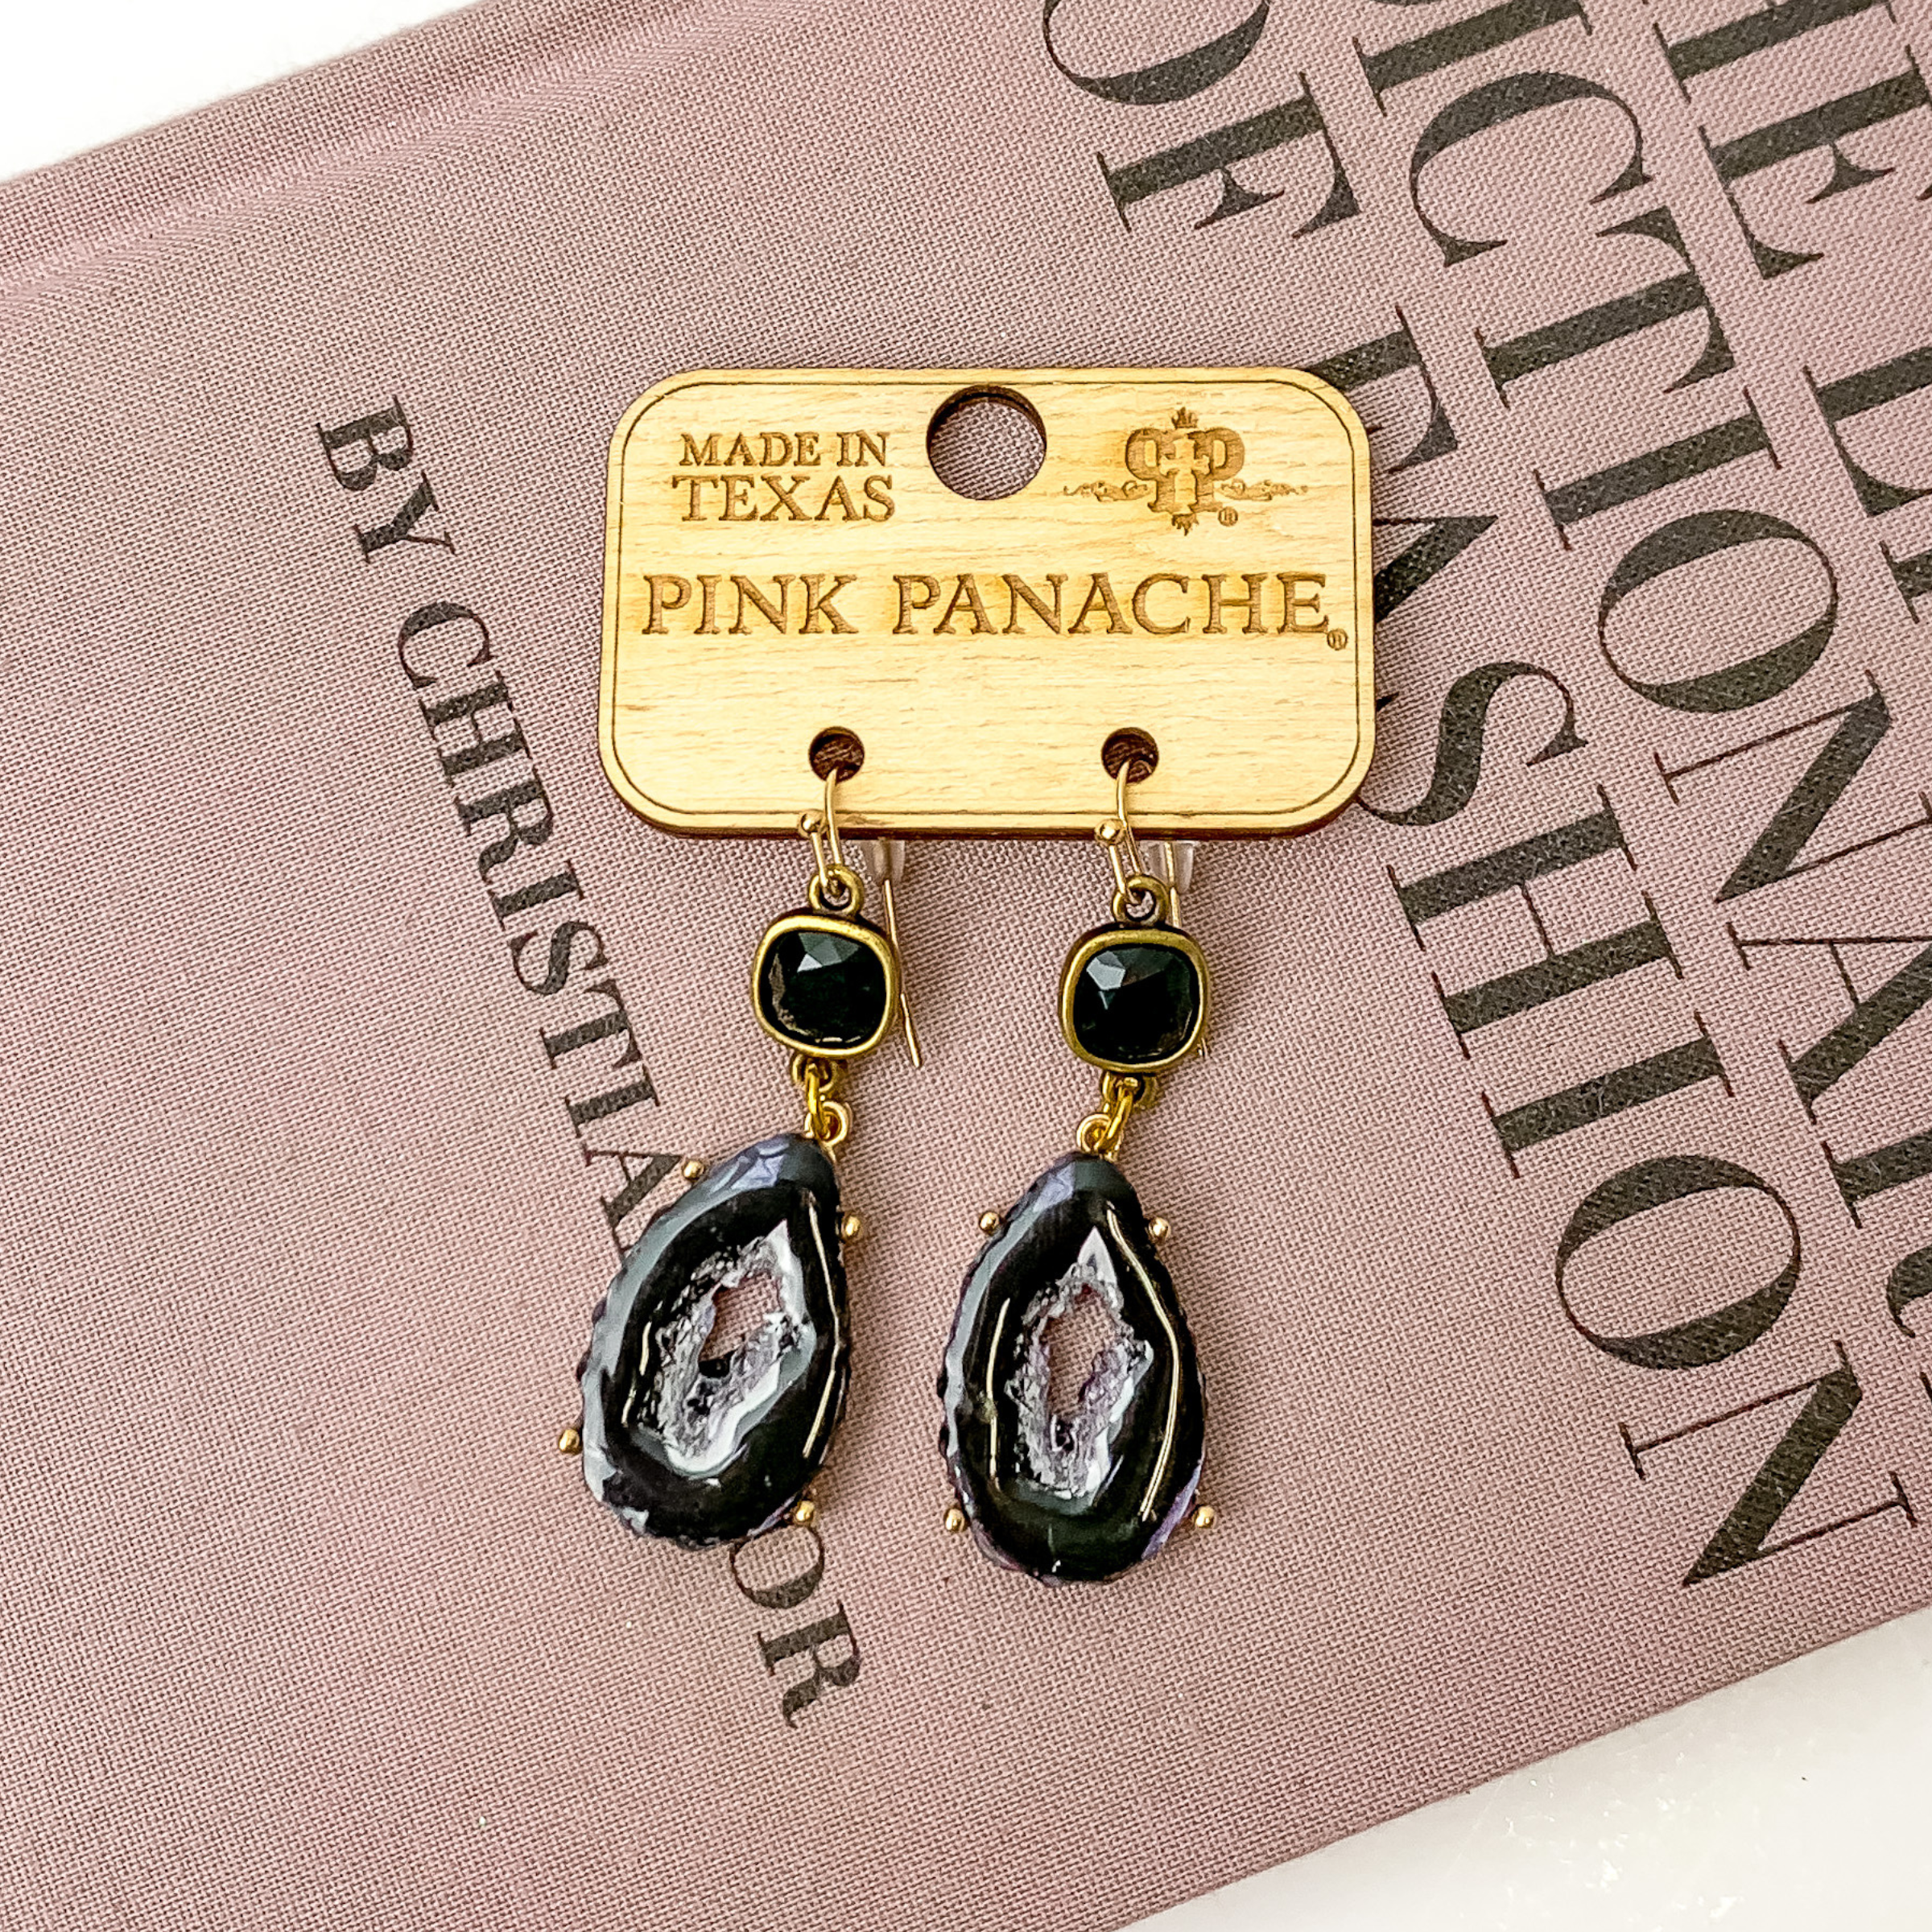 Black cushion cut crystal earrings with a hanging black, druzy stone pendant. These earrings are pictured on a mauve book on a white background. 